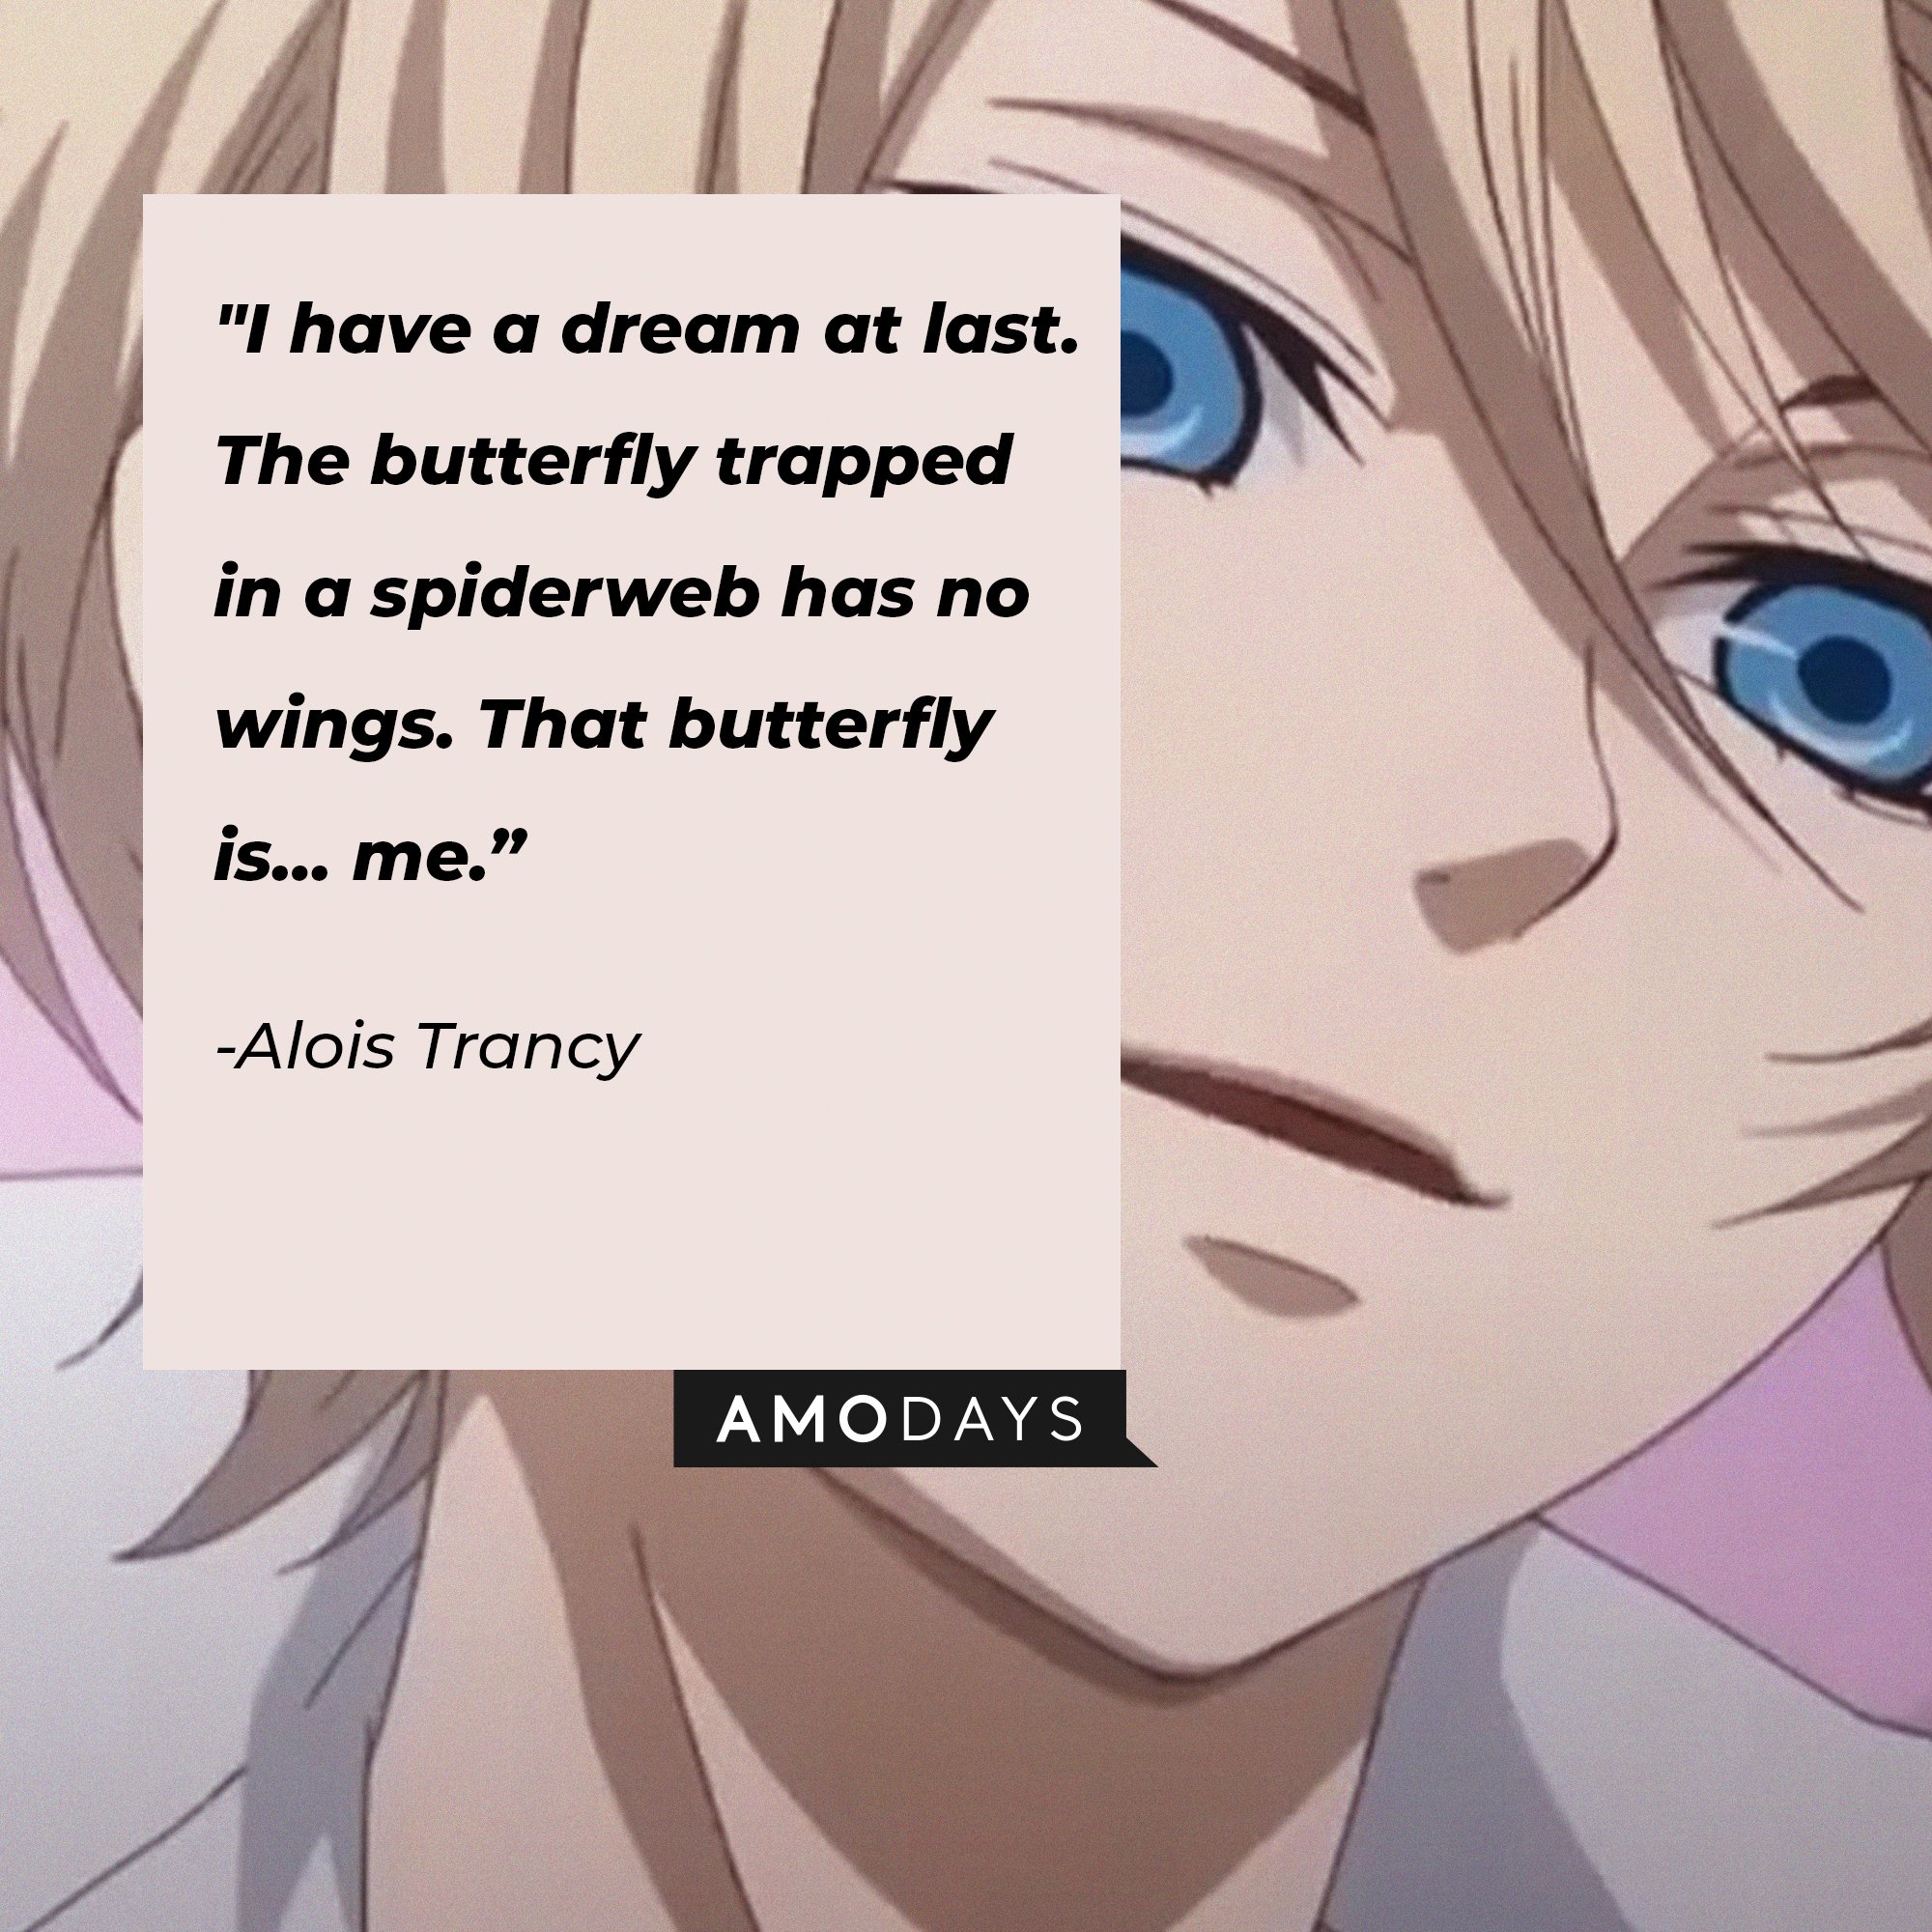 Alois Trancy’s quote: "I have a dream at last. The butterfly trapped in a spiderweb has no wings. That butterfly is… me.” | Image: AmoDays